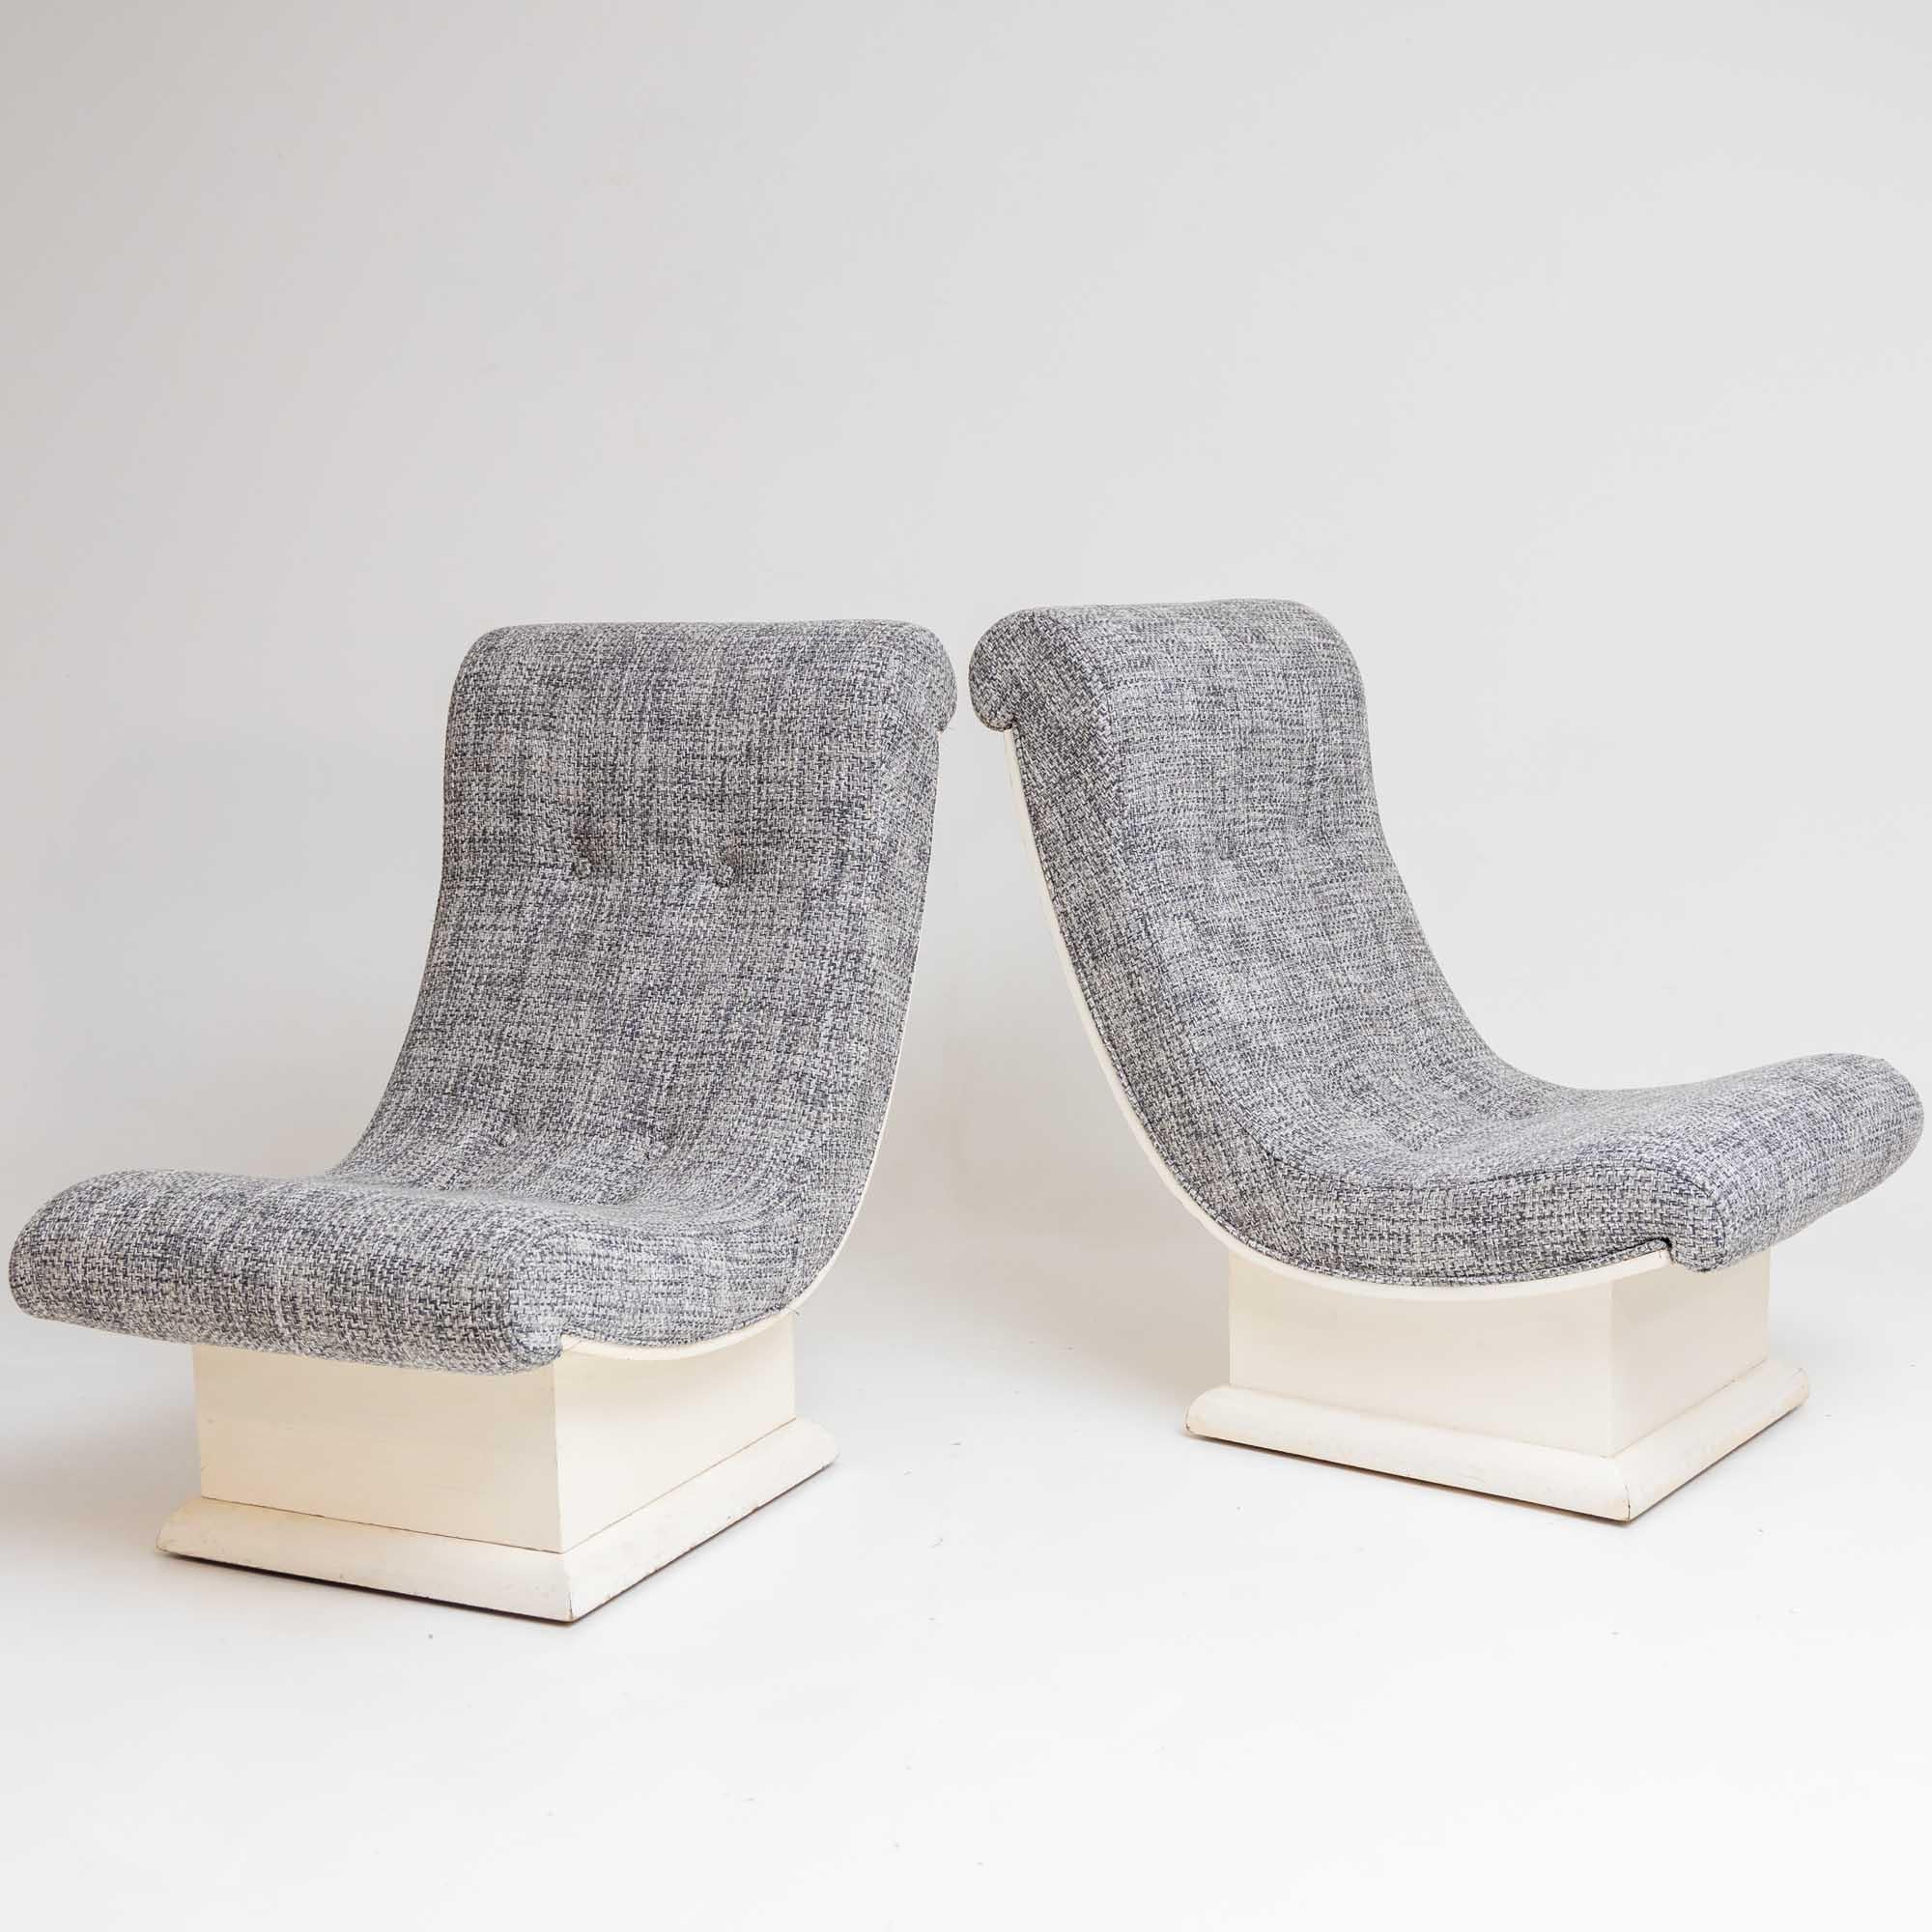 Italian Large Lounge Chairs, Mid-20th Century For Sale